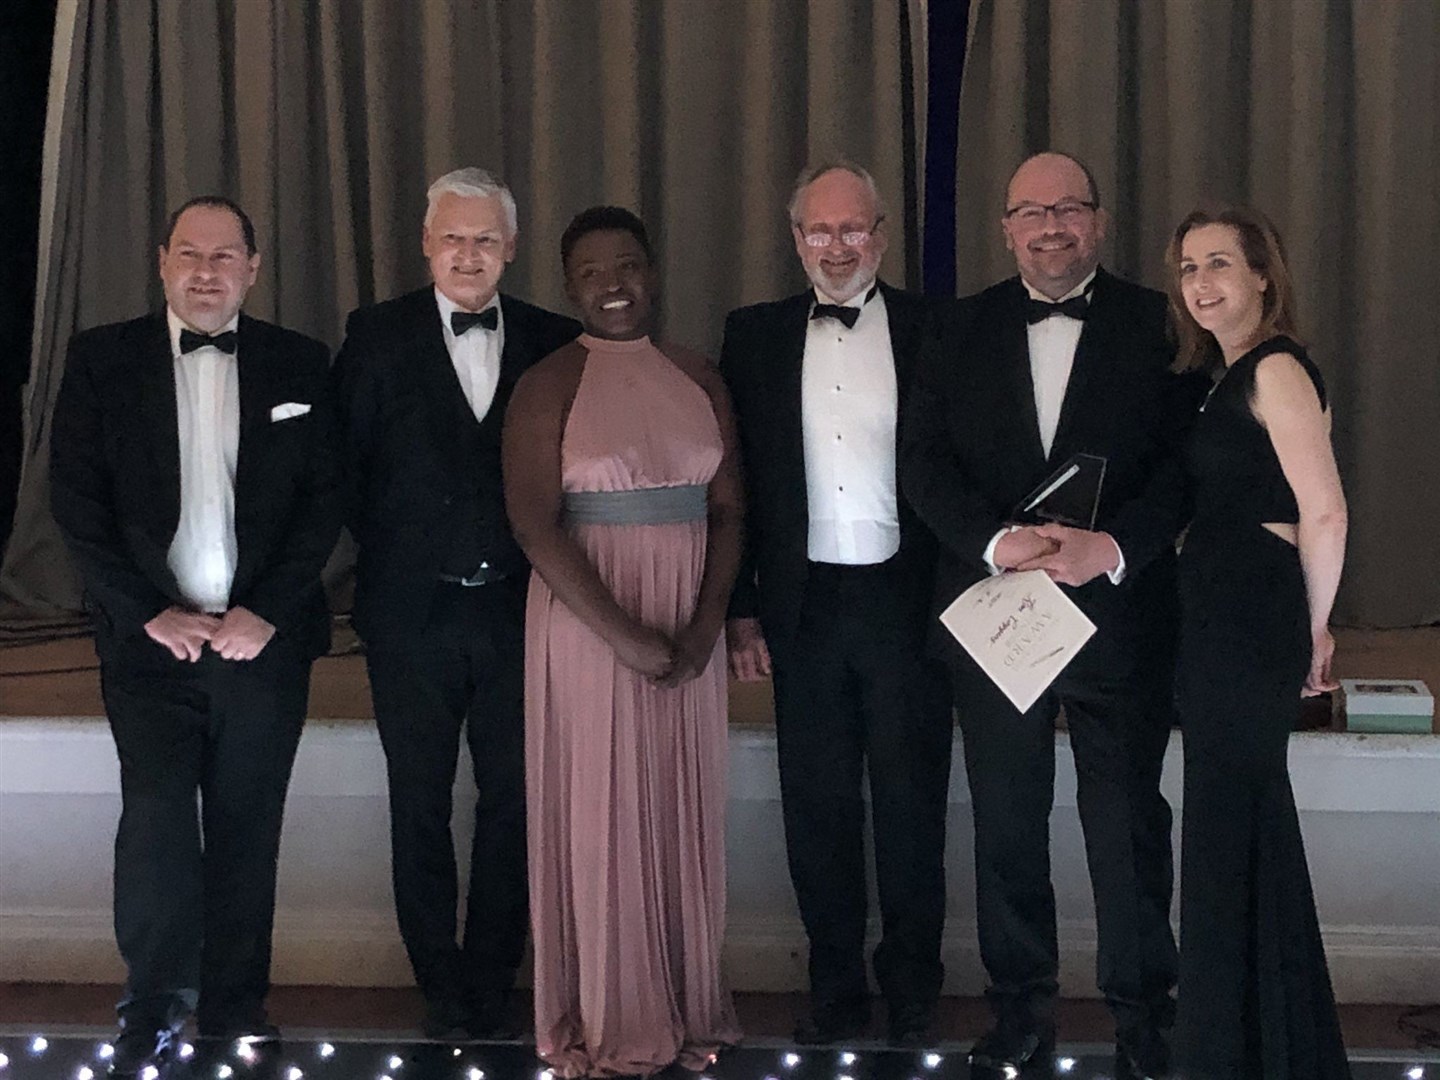 Ron Coggins (second from right), a surgeon from Raigmore Hospital, was presented with the Silver Scalpel award. The award marks excellence in training.